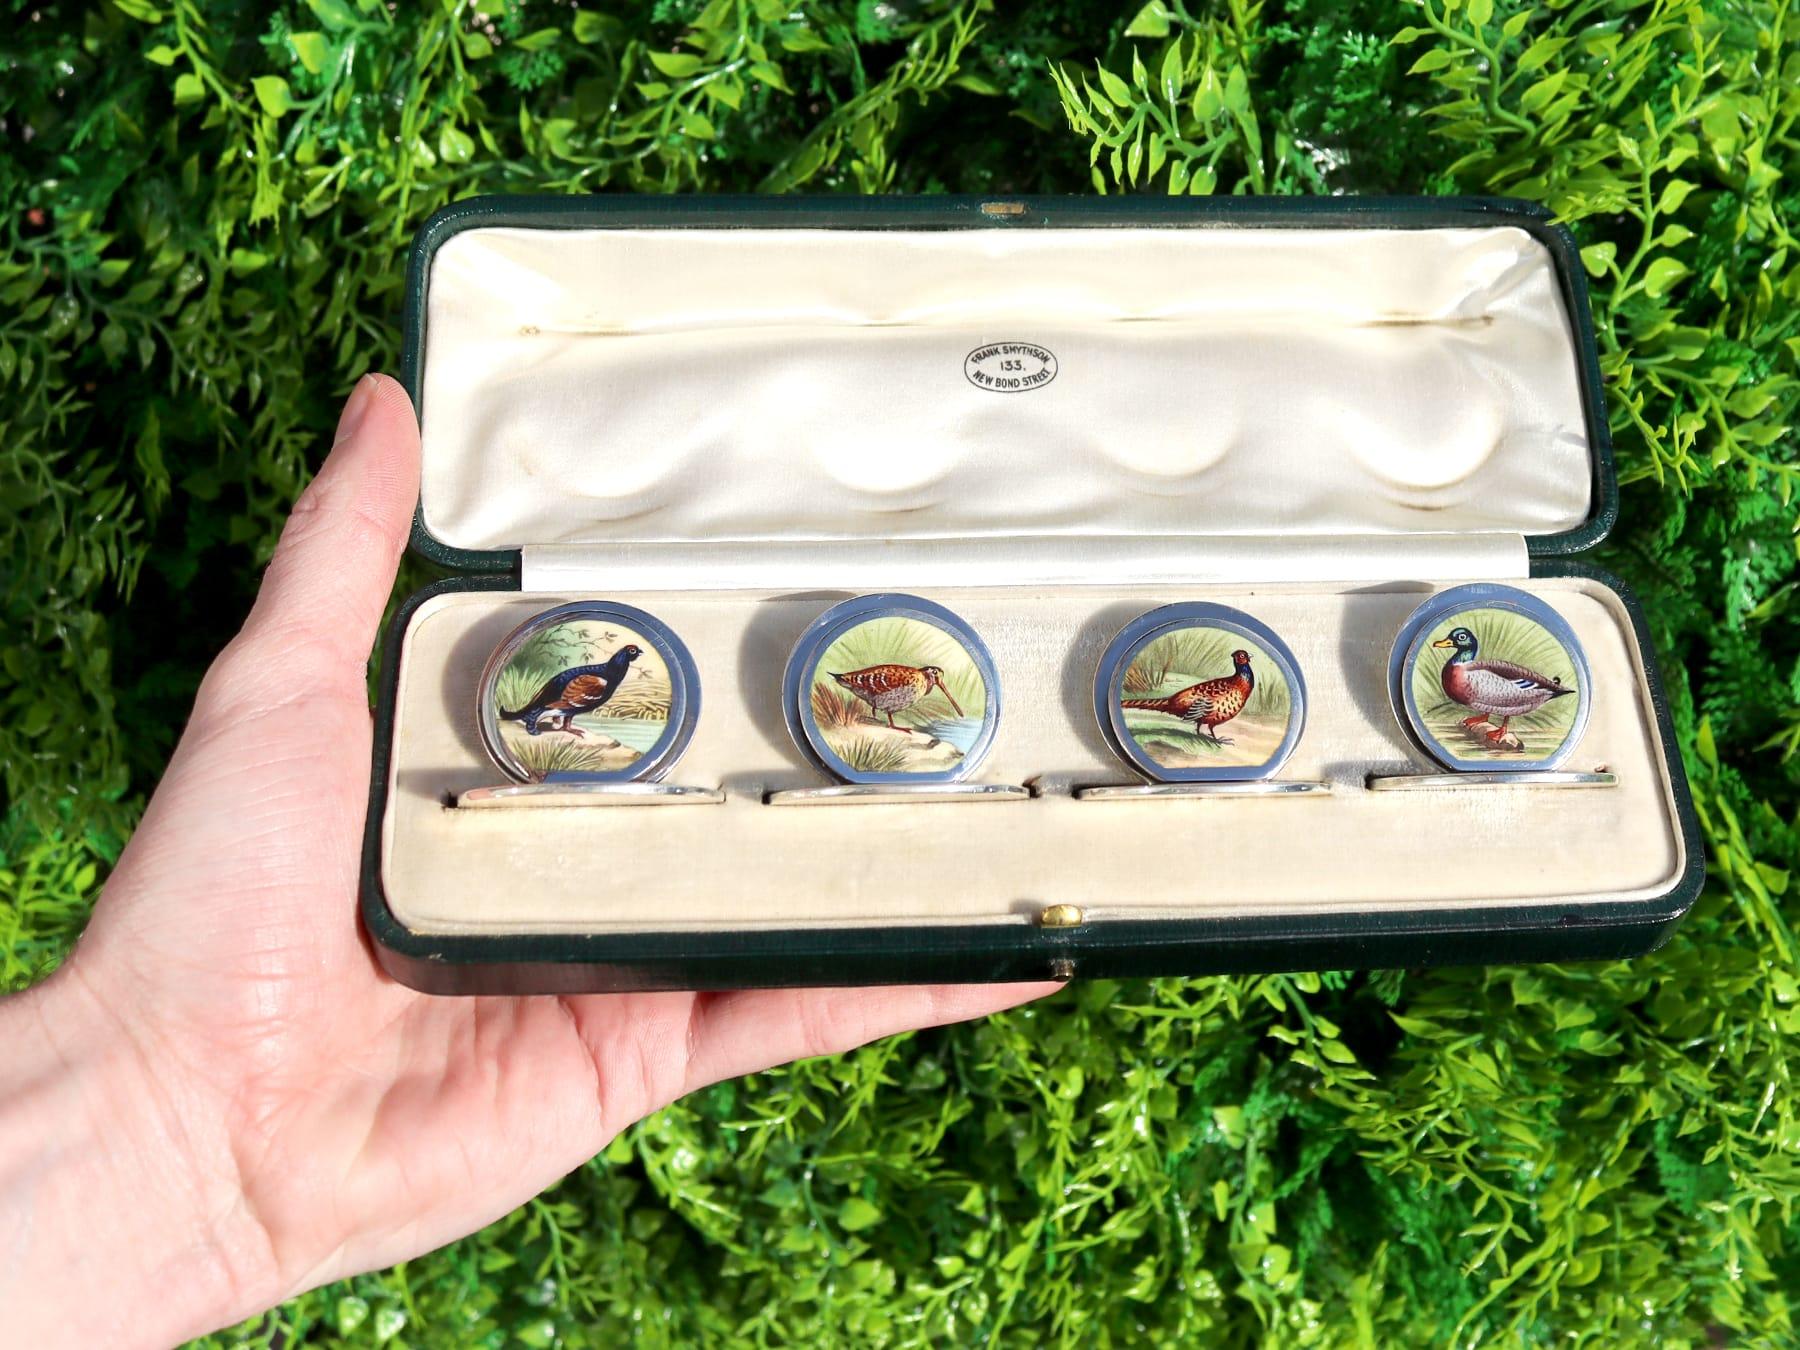 An exceptional, fine and impressive set of four antique Edwardian English sterling silver and enamel menu or card holders, boxed; an addition to our diverse dining silverware collection.

These exceptional antique Edwardian sterling silver menu